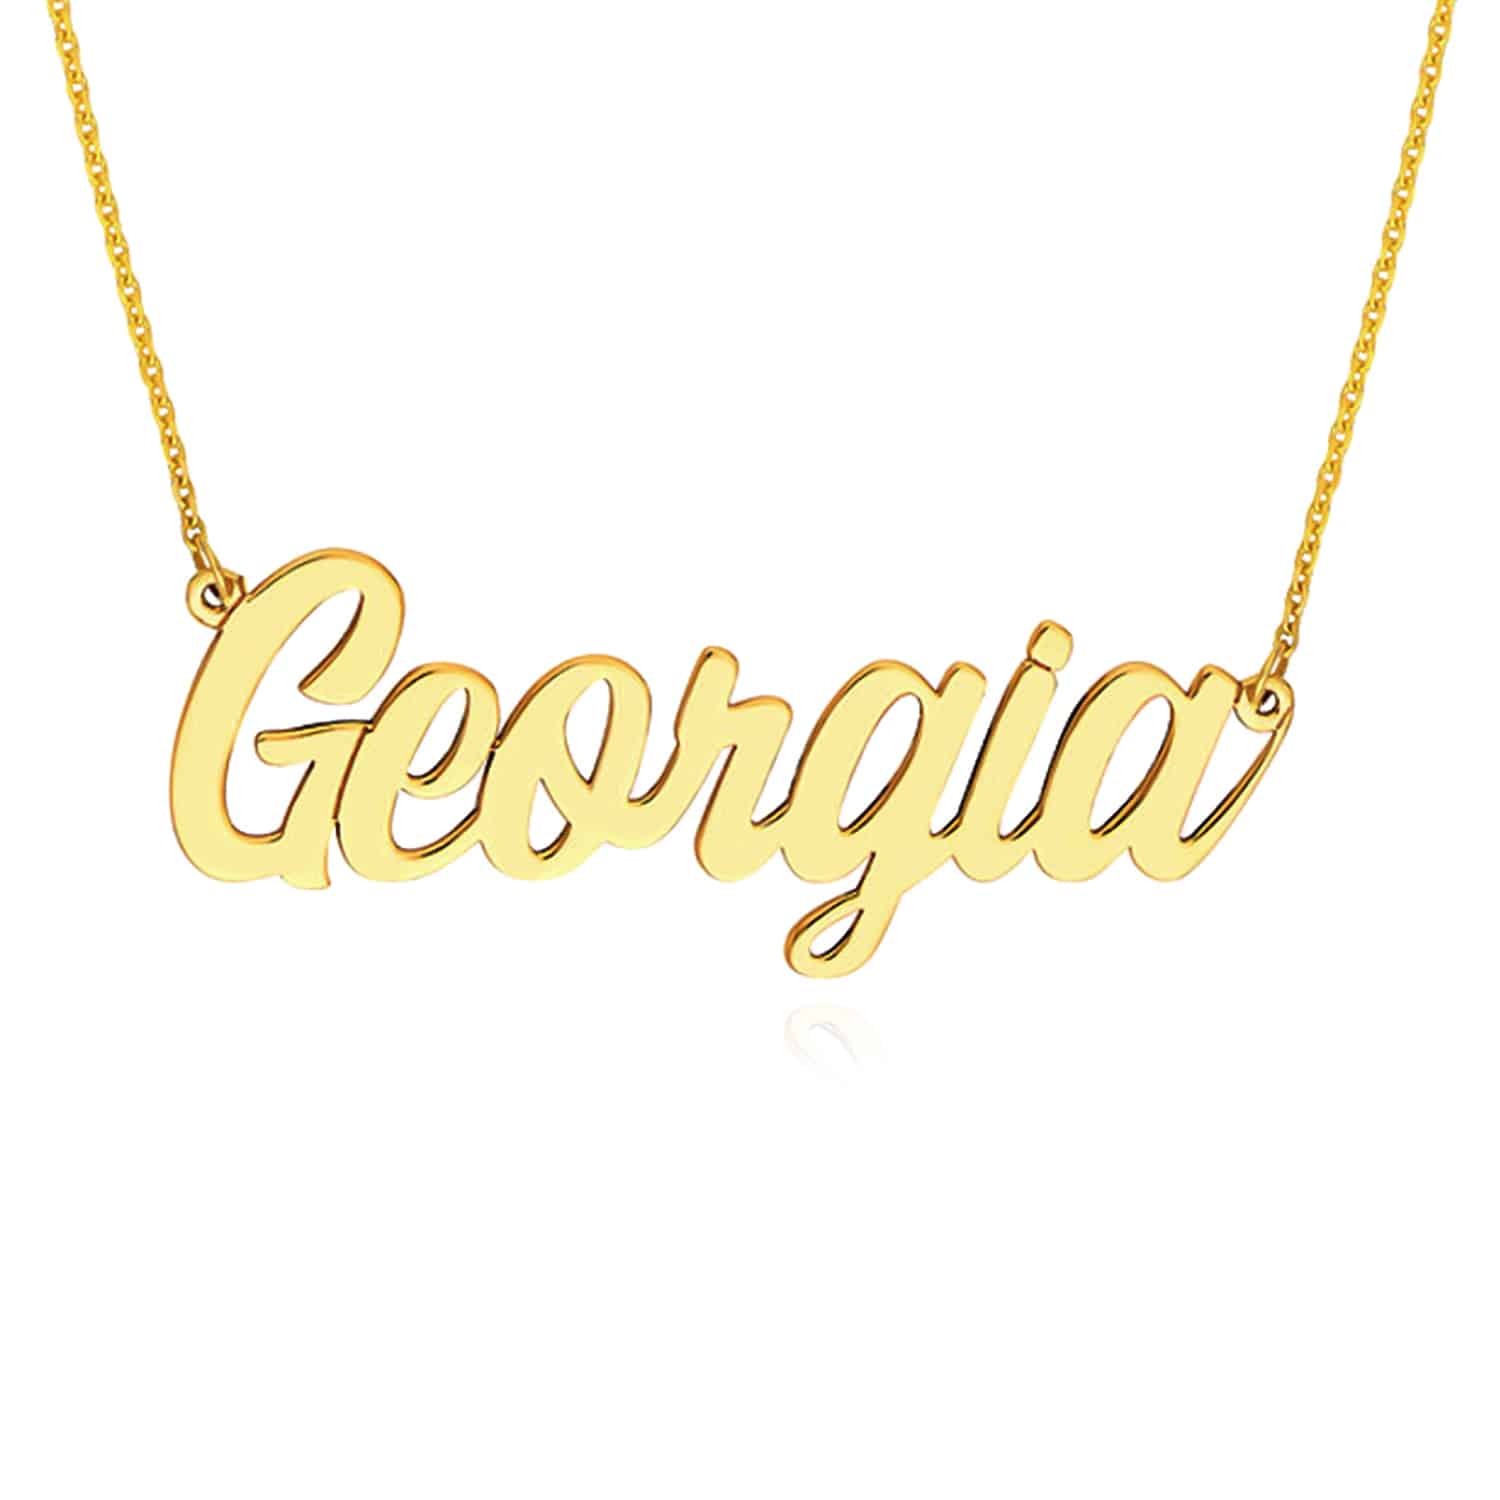 Customizable 14K Gold Yellow White Rose Script Nameplate Pendant Necklace 14-18" - Yellow Gold, 14"-16" Adjustable